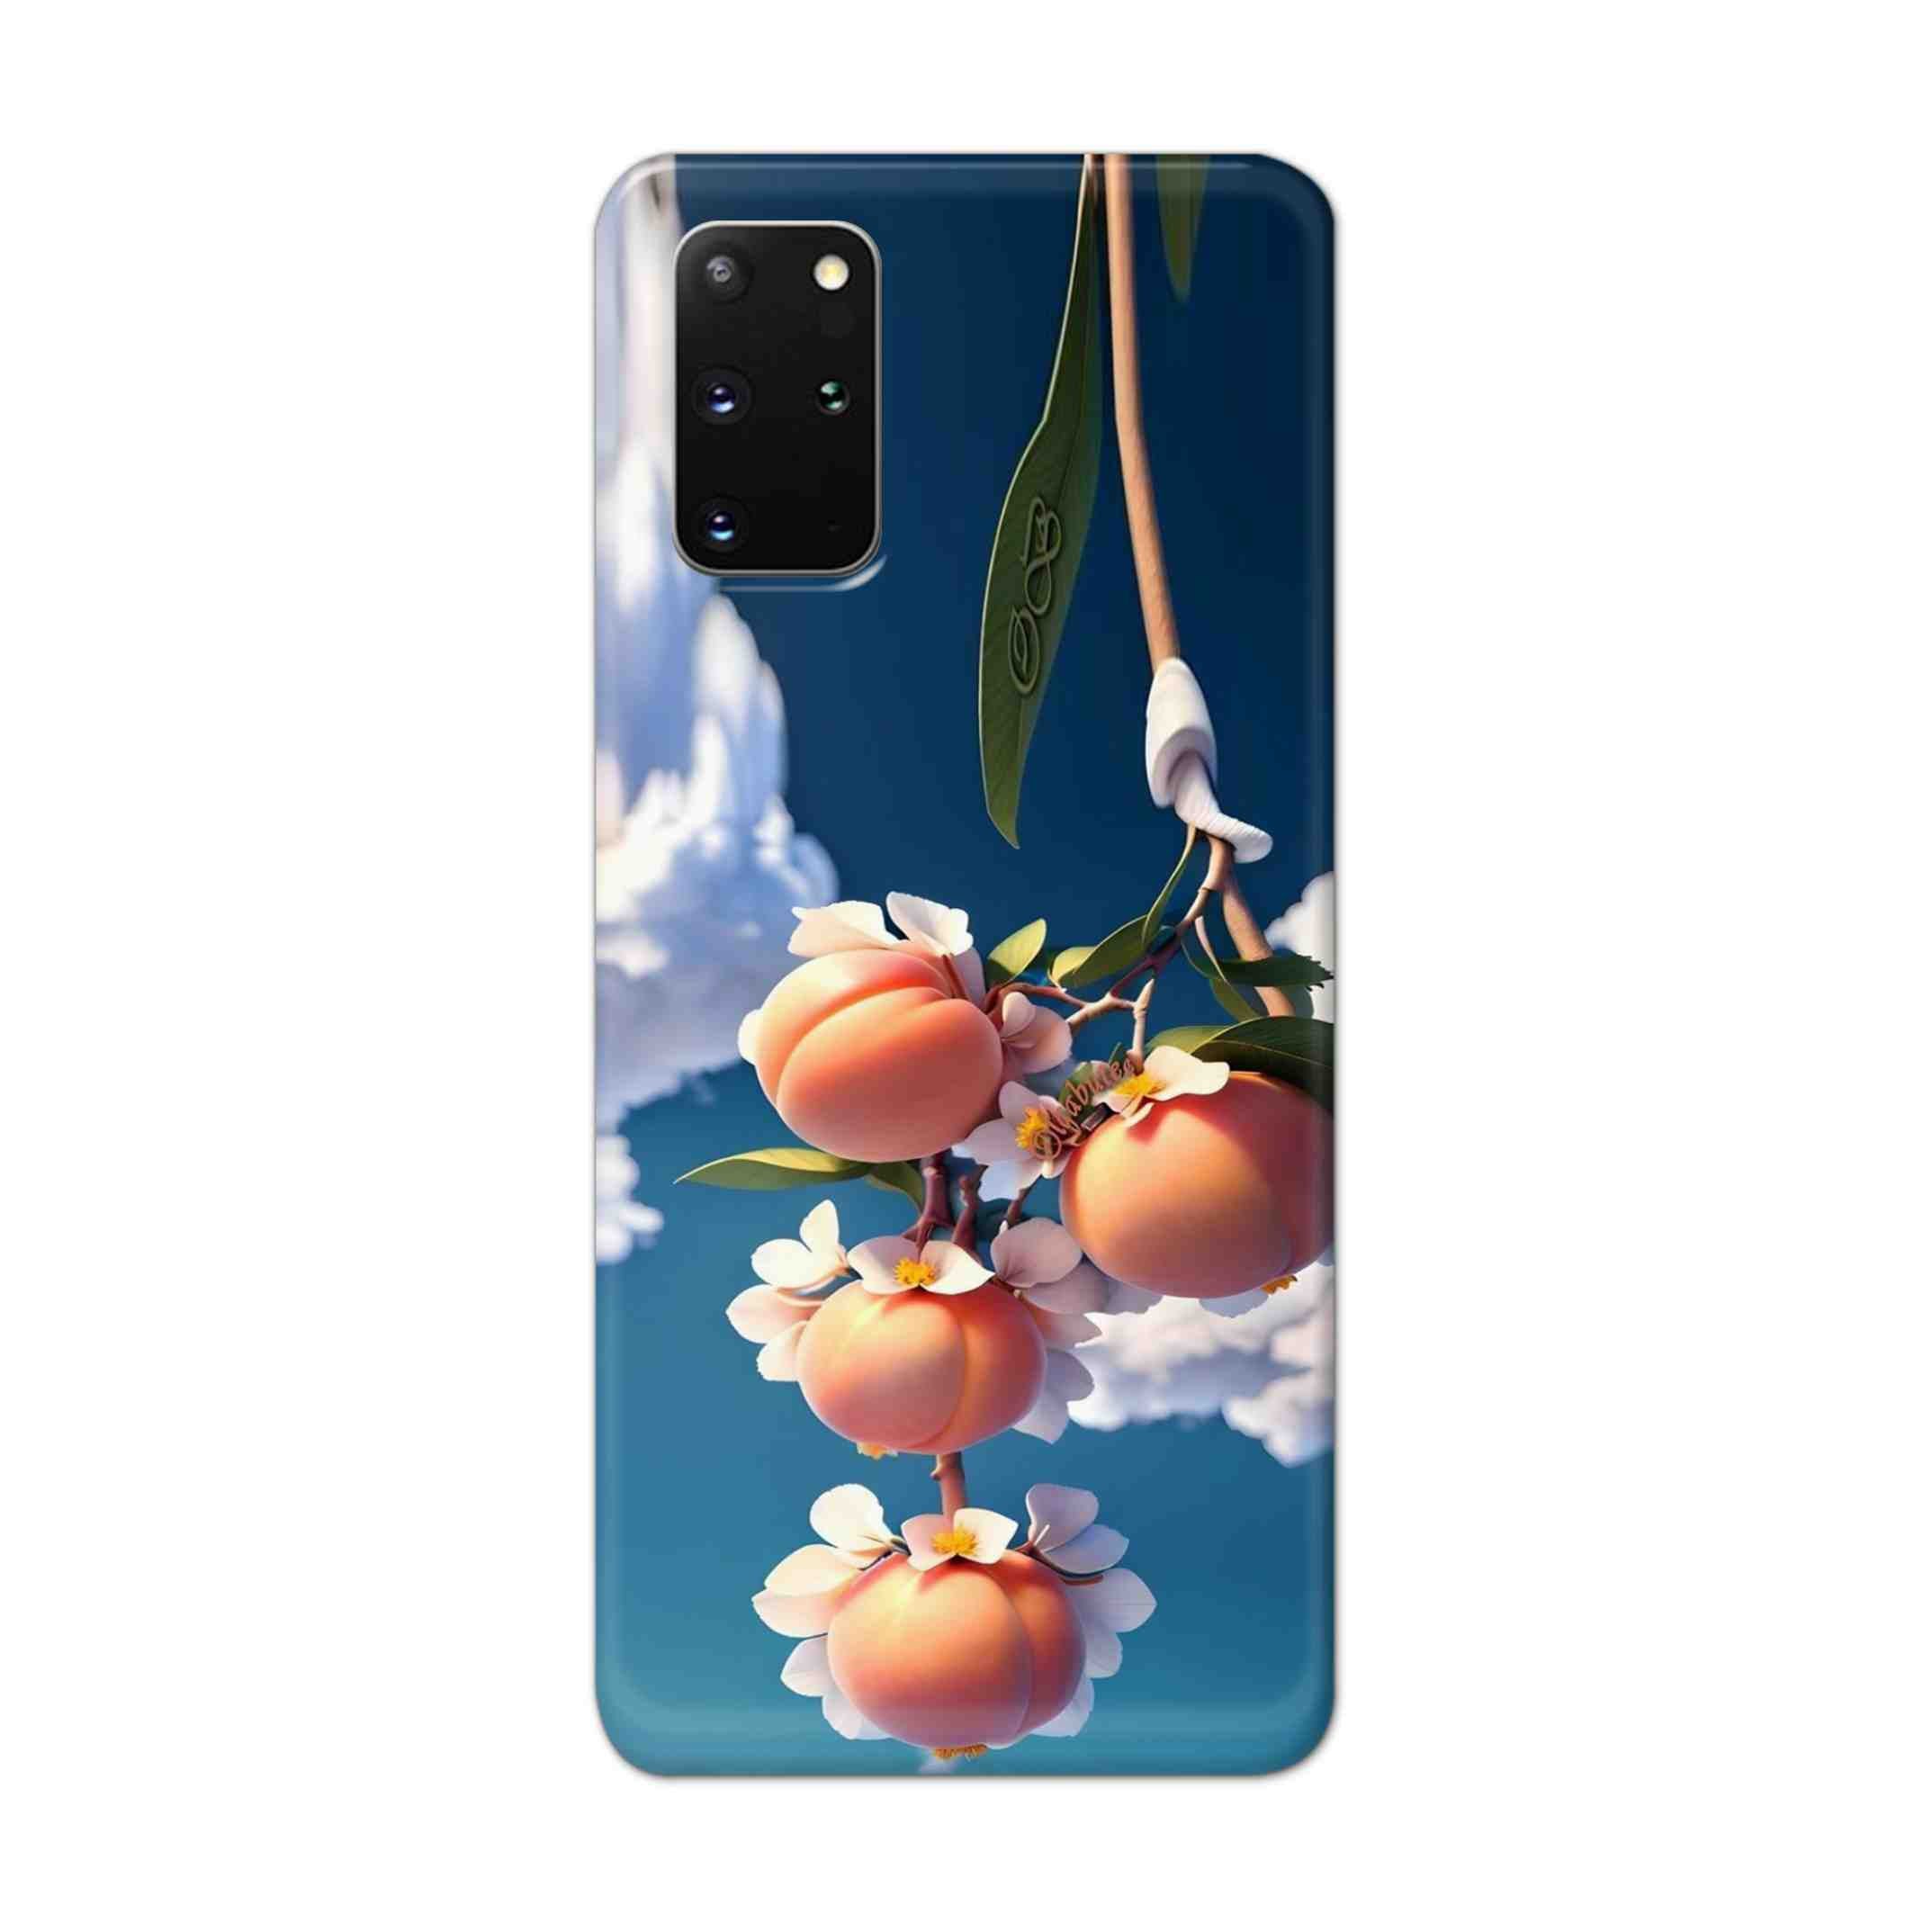 Buy Fruit Hard Back Mobile Phone Case Cover For Samsung Galaxy S20 Plus Online